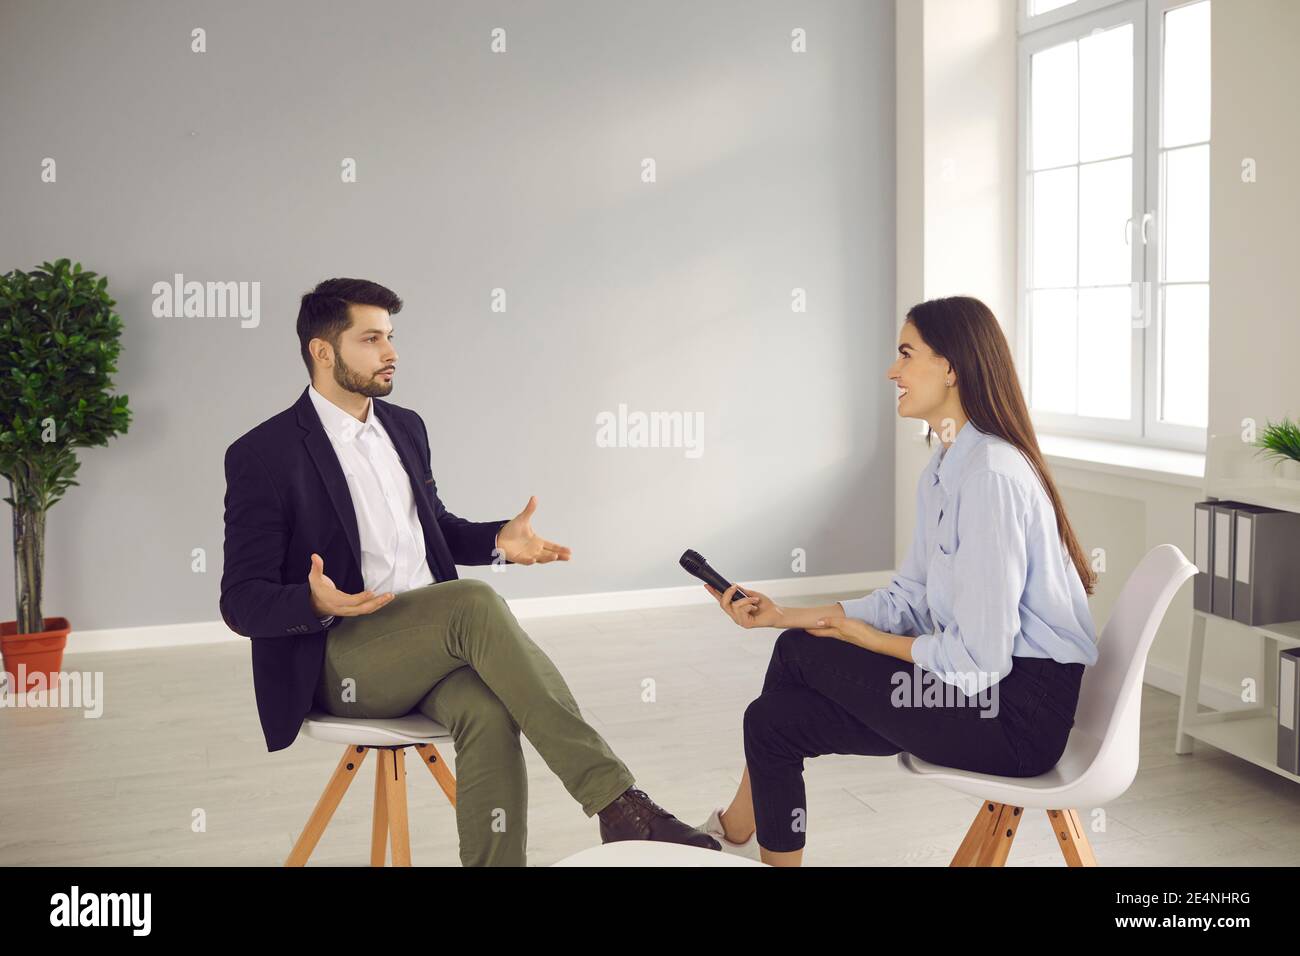 Famous person sitting in TV studio and giving interview to television journalist Stock Photo